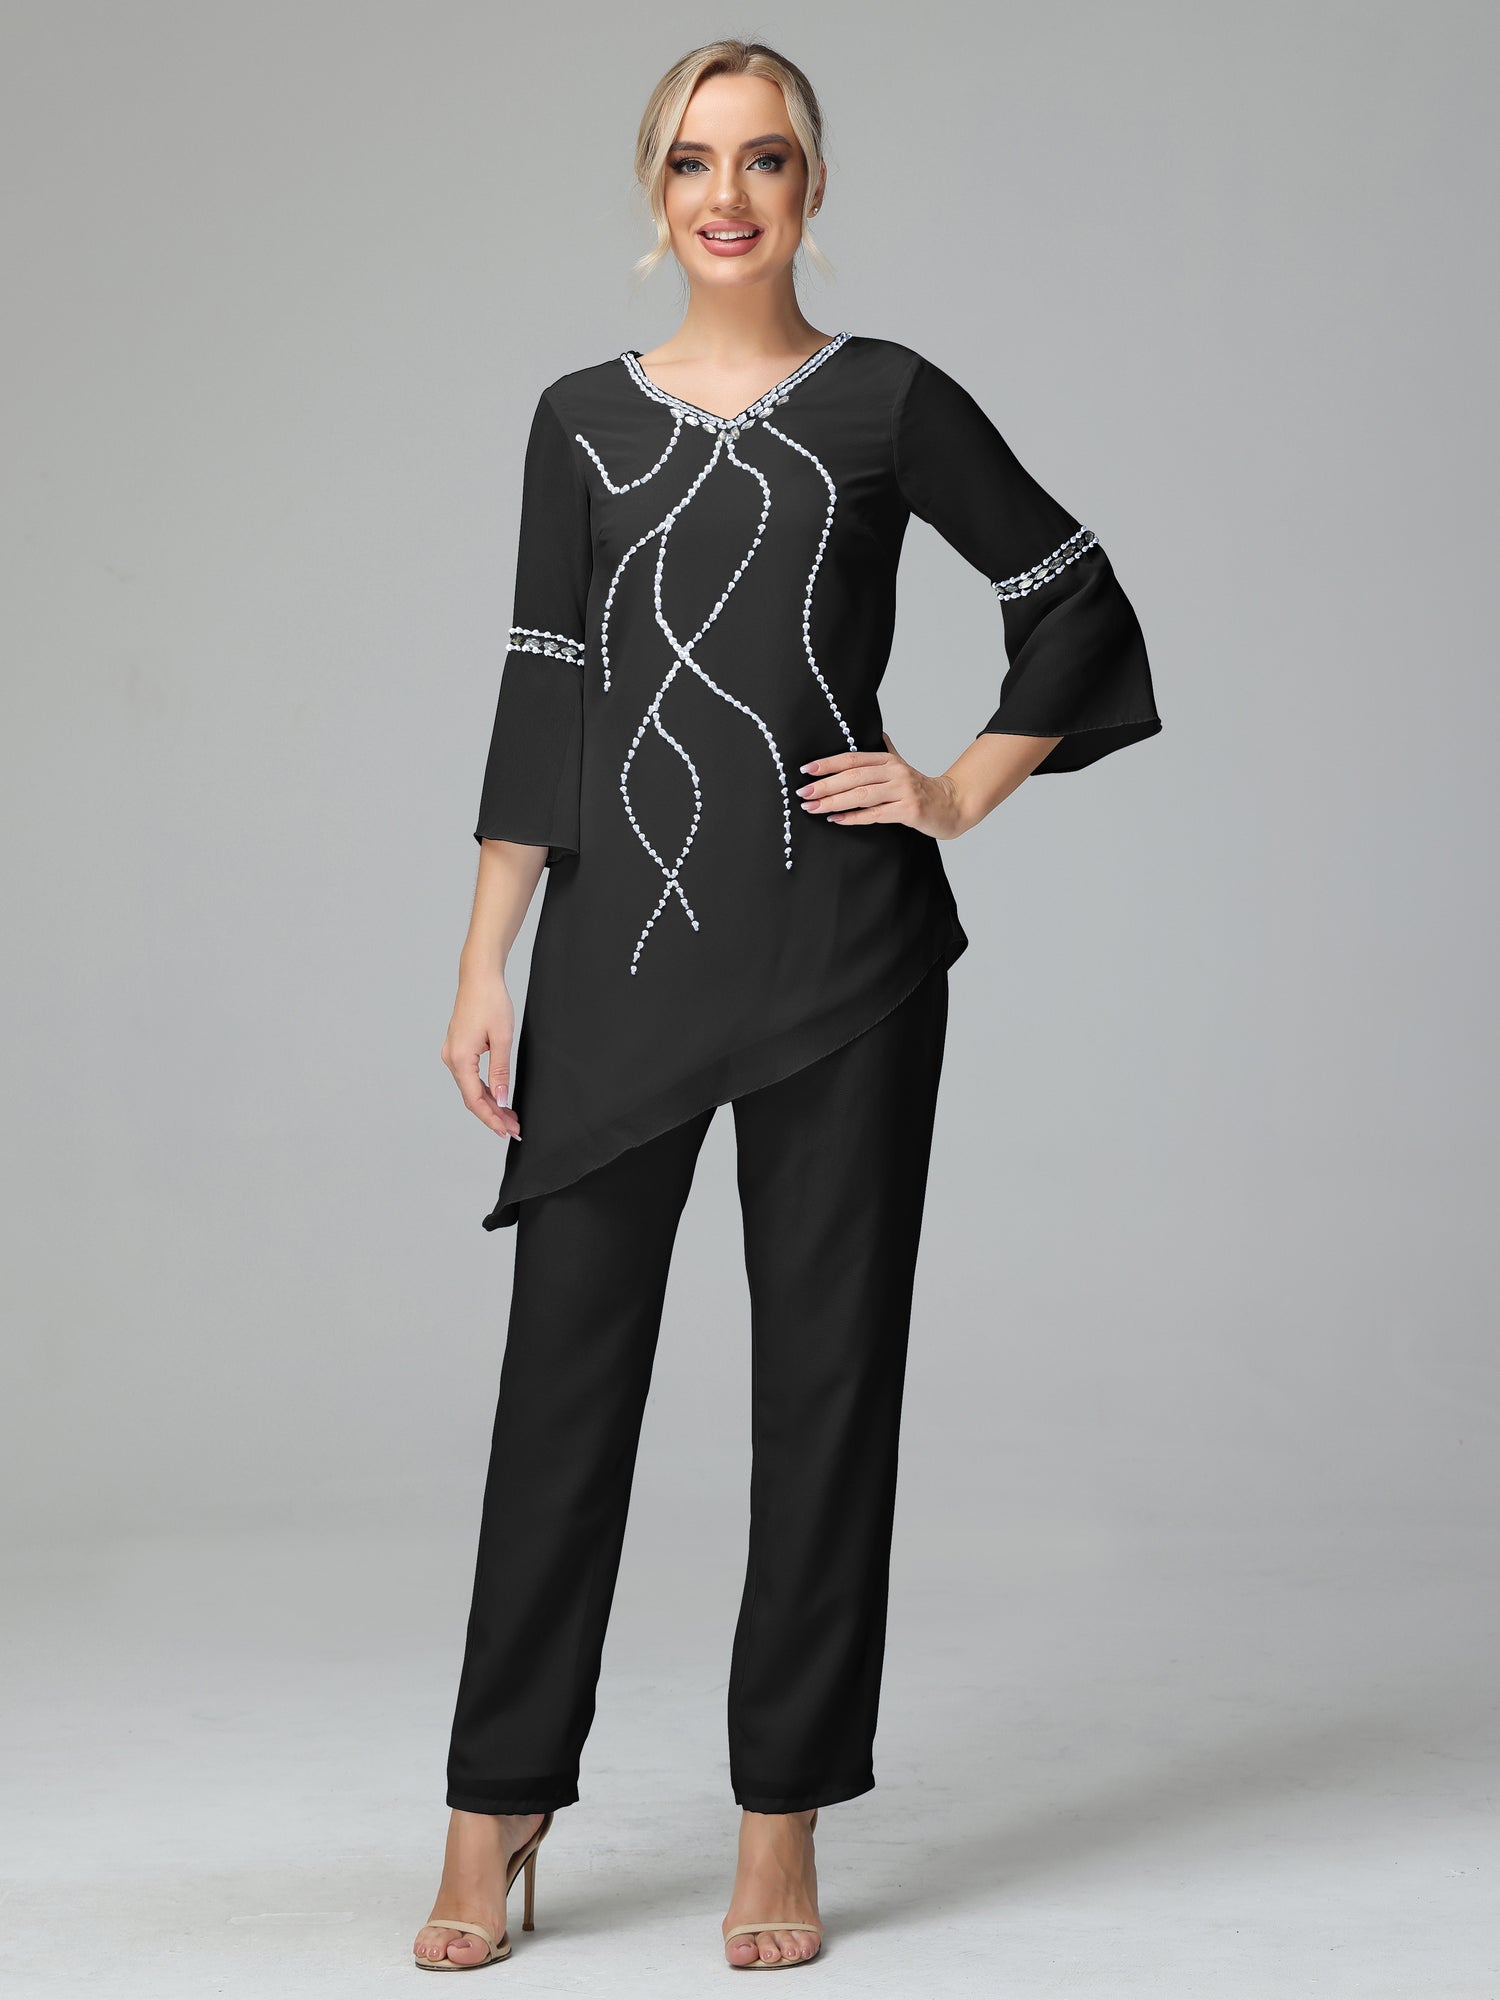 Chic Black Three Piece Mother Of The Bride Pant Suit With V Neck, Long  Sleeves, And Plus Size Jackets Perfect For Weddings And Evening Events  Available In Plus Sizes From Weddingteam, $86.32